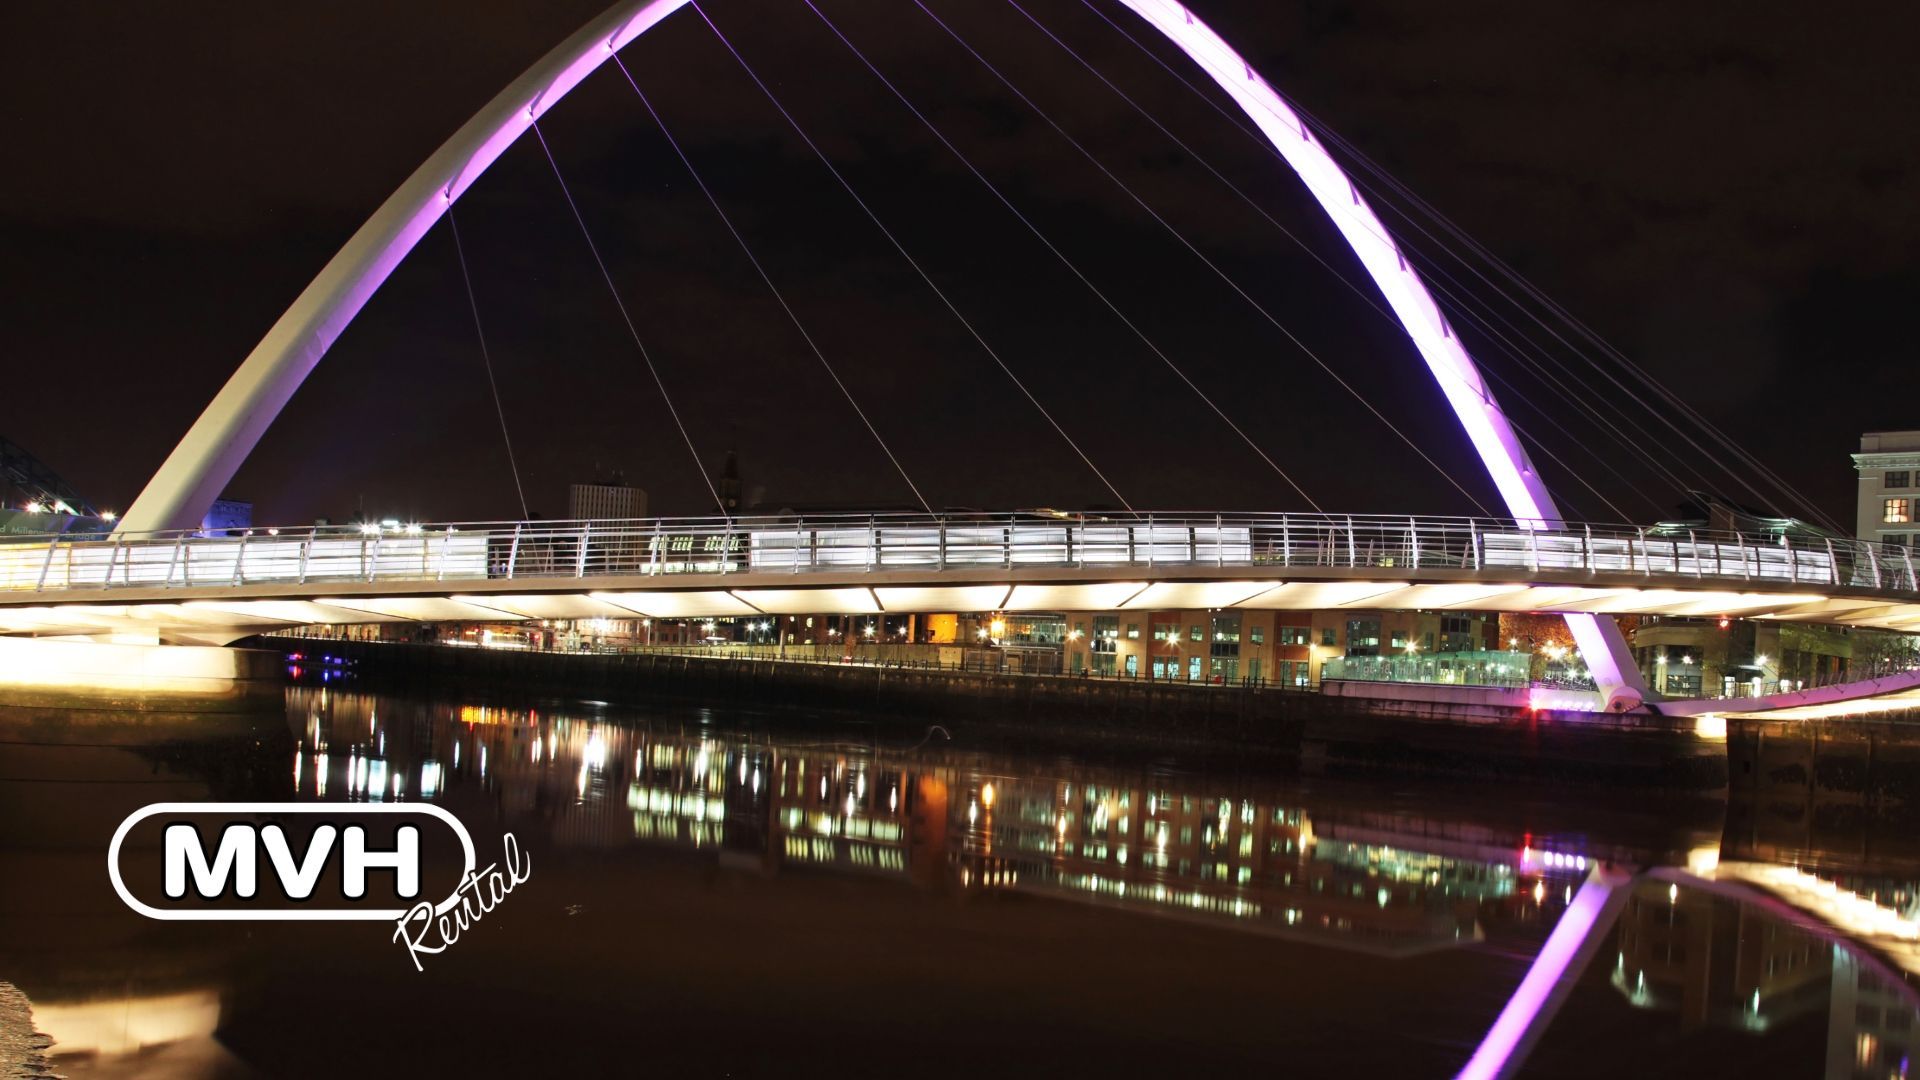 From world-class culture and stunning views to world-class shopping and amazing food, the jewel in the North East's vibrant crown is full of surprises.